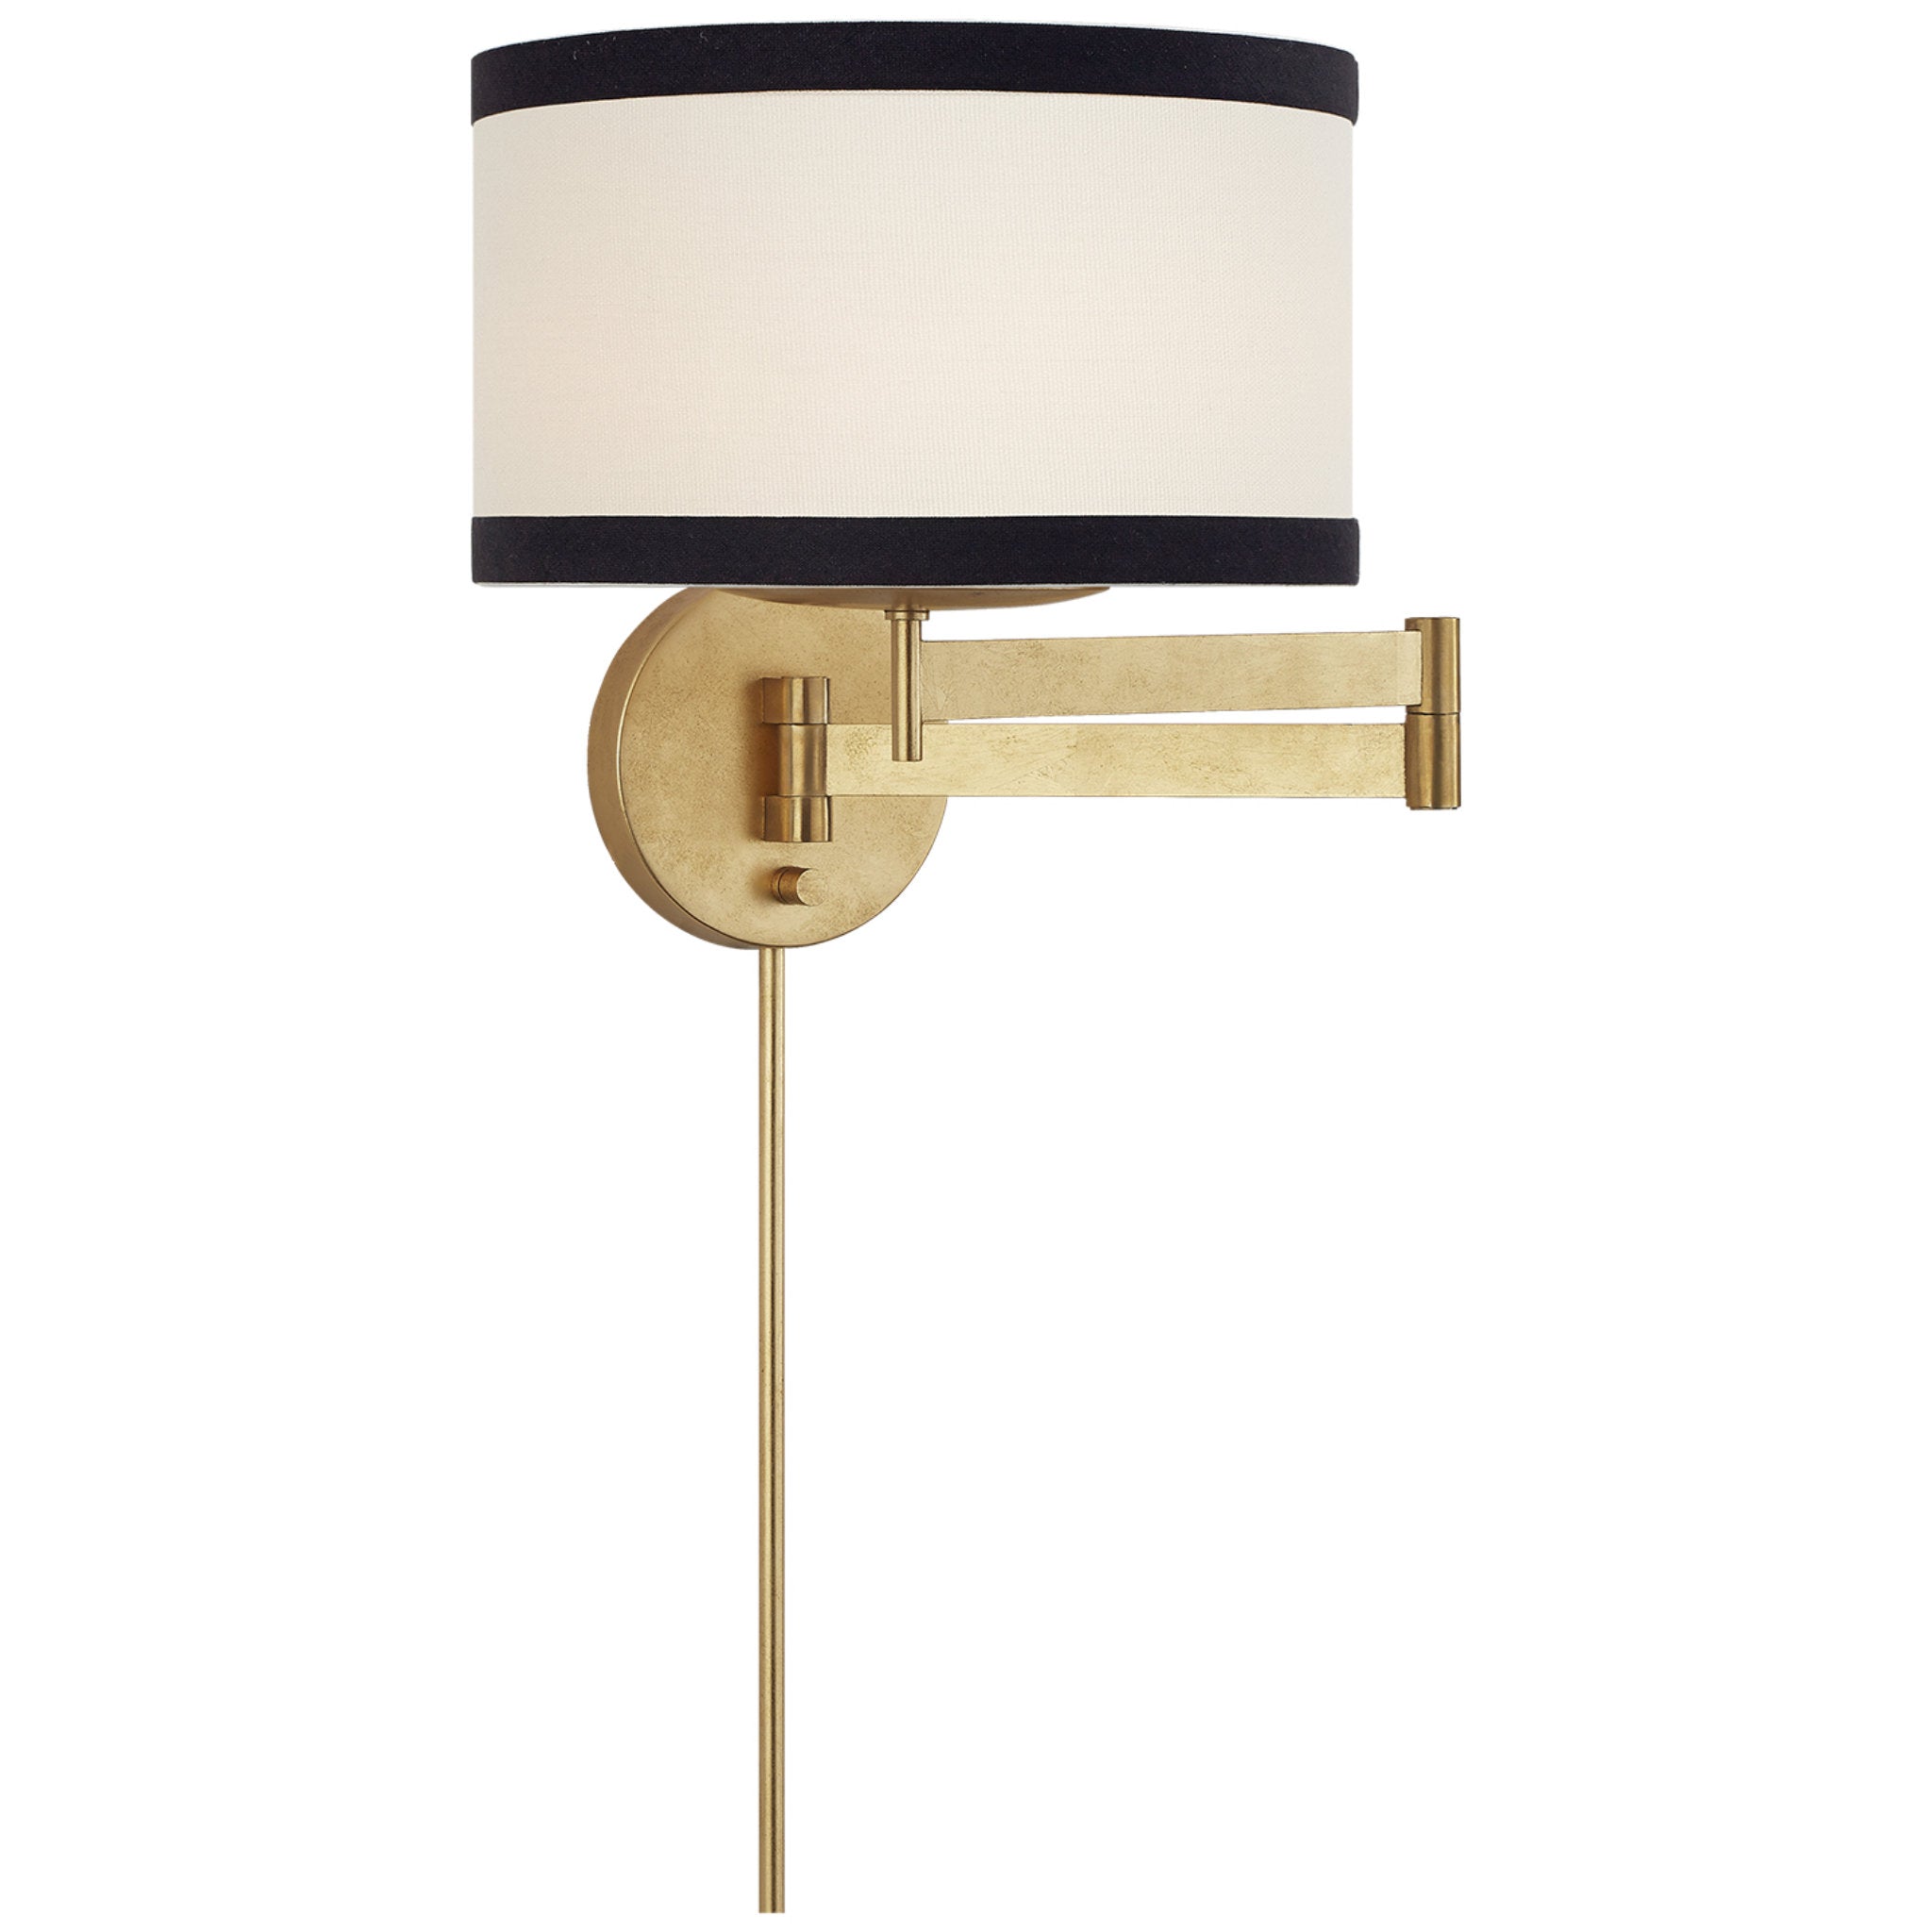 kate spade new york Walker Swing Arm Sconce in Gild with Cream Linen Shade with Black Linen Trim